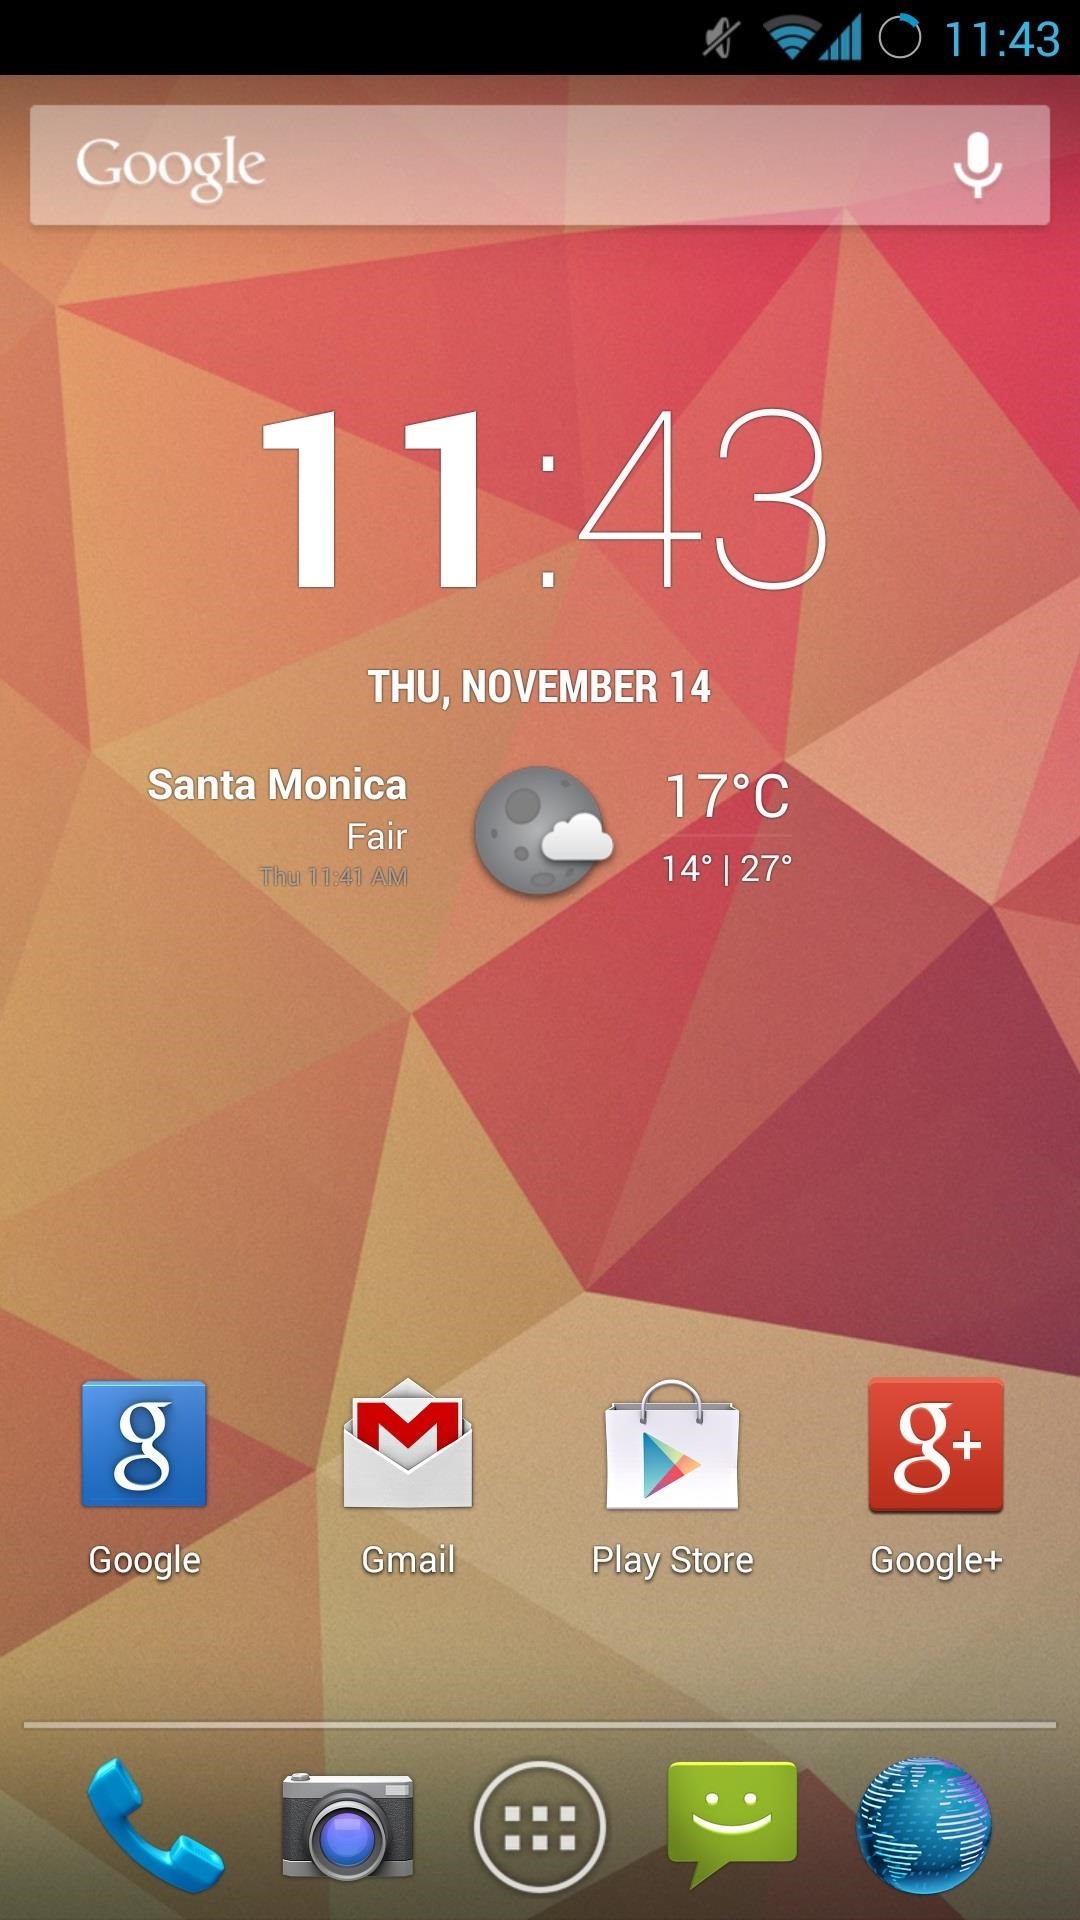 How to Install CyanogenMod on the HTC One Even Faster Now Without Rooting or Unlocking First